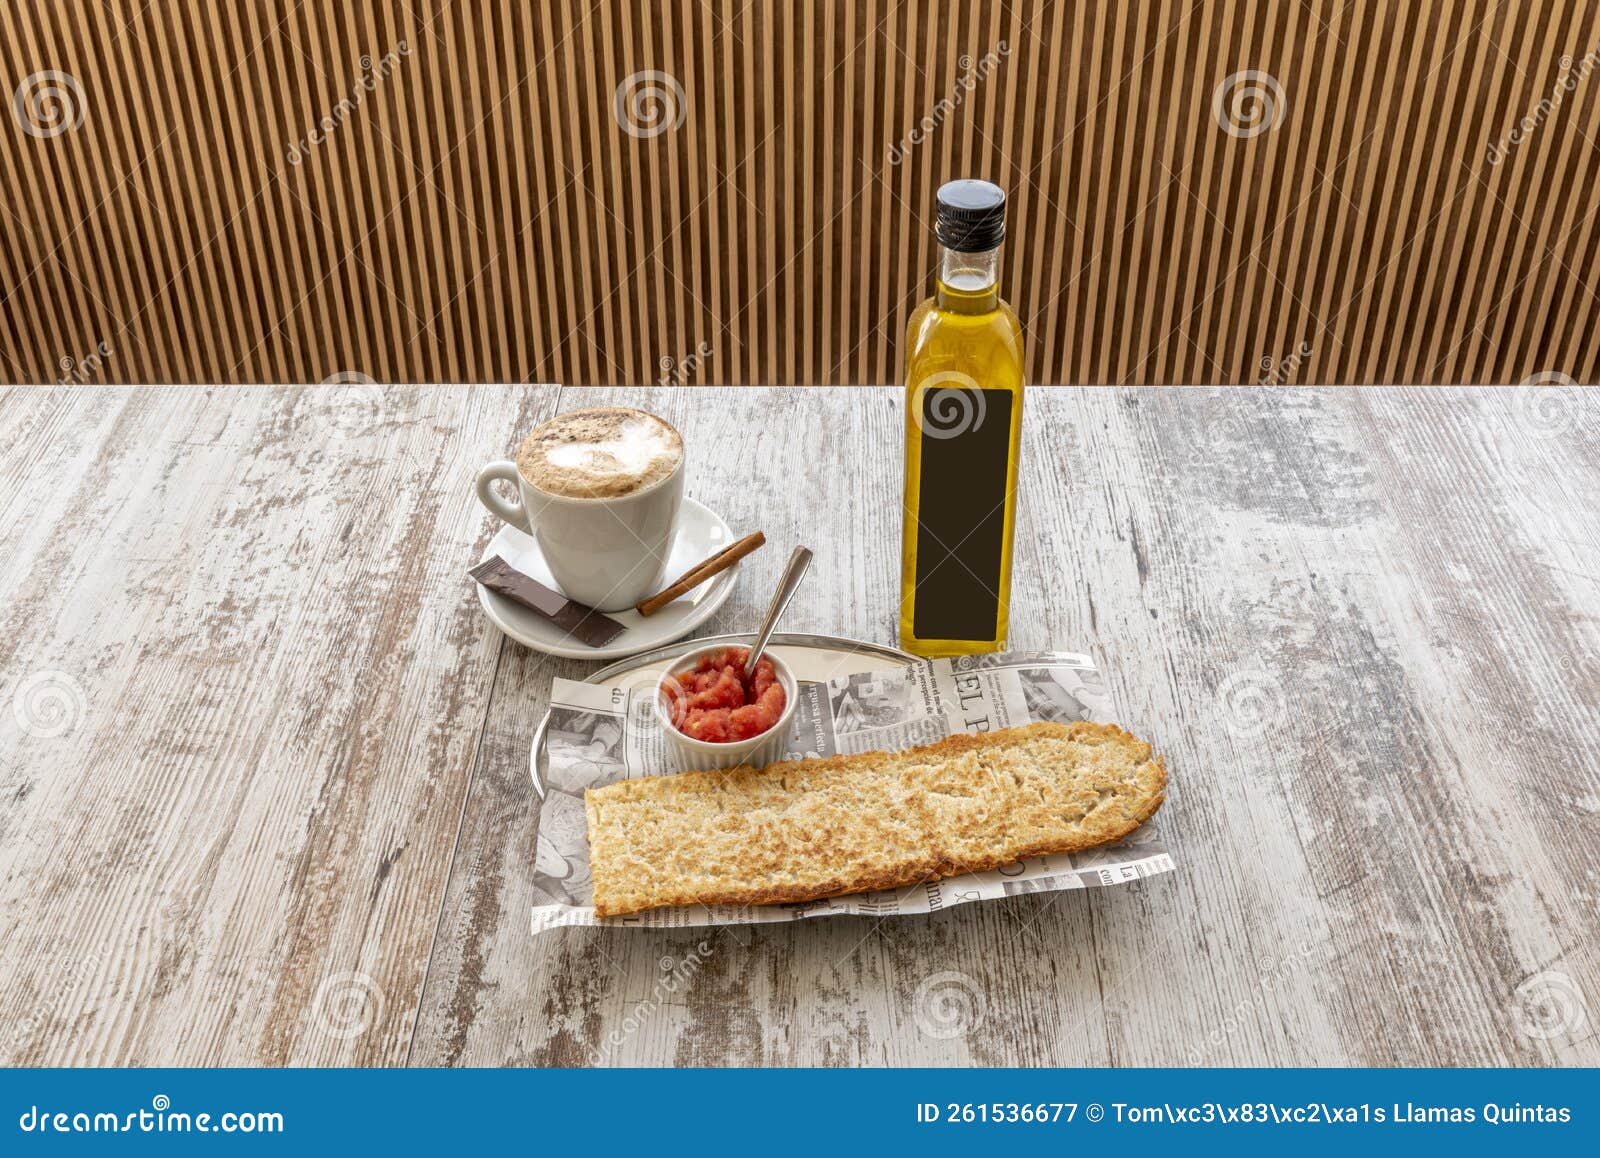 typical spanish breakfast of cafe con leche with toasted bread with tomato and olive oil